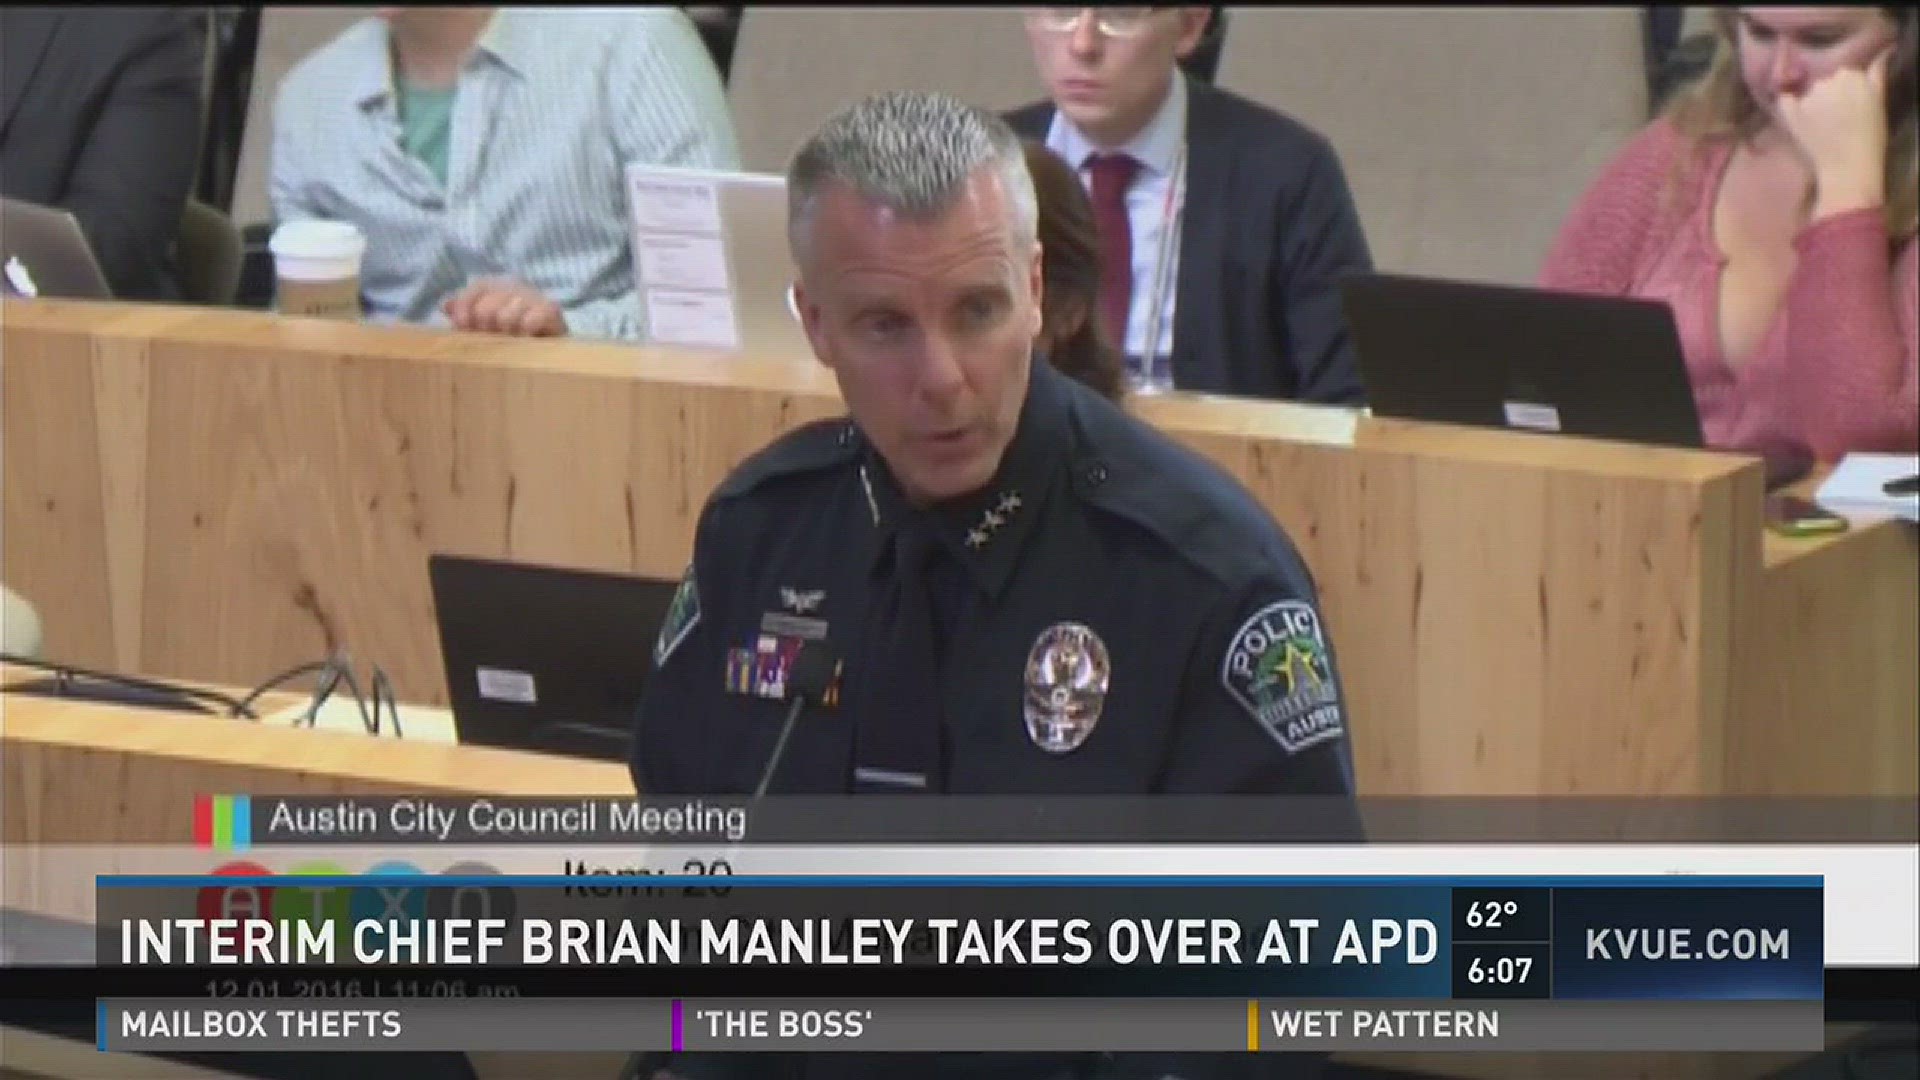 Interim chief Brian Manley takes over at APD